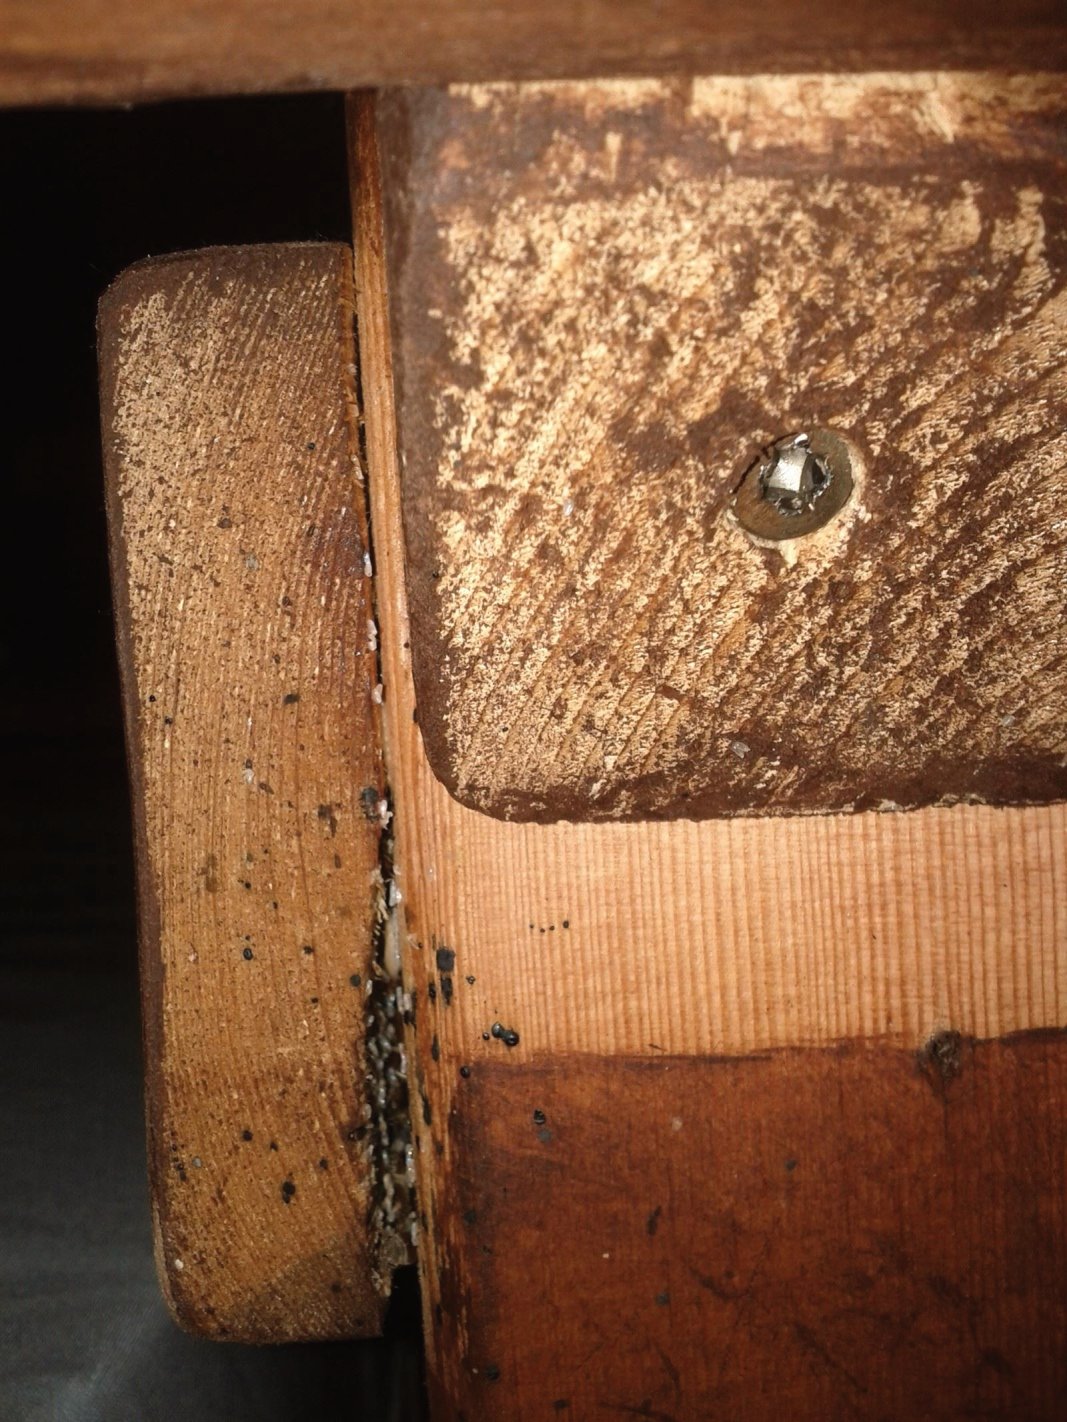 The white spots are Bed Bug eggs in the crevice between the pieces of wood on the bed frame. The dark spots are called Spotting which is Bed Bug excrement.